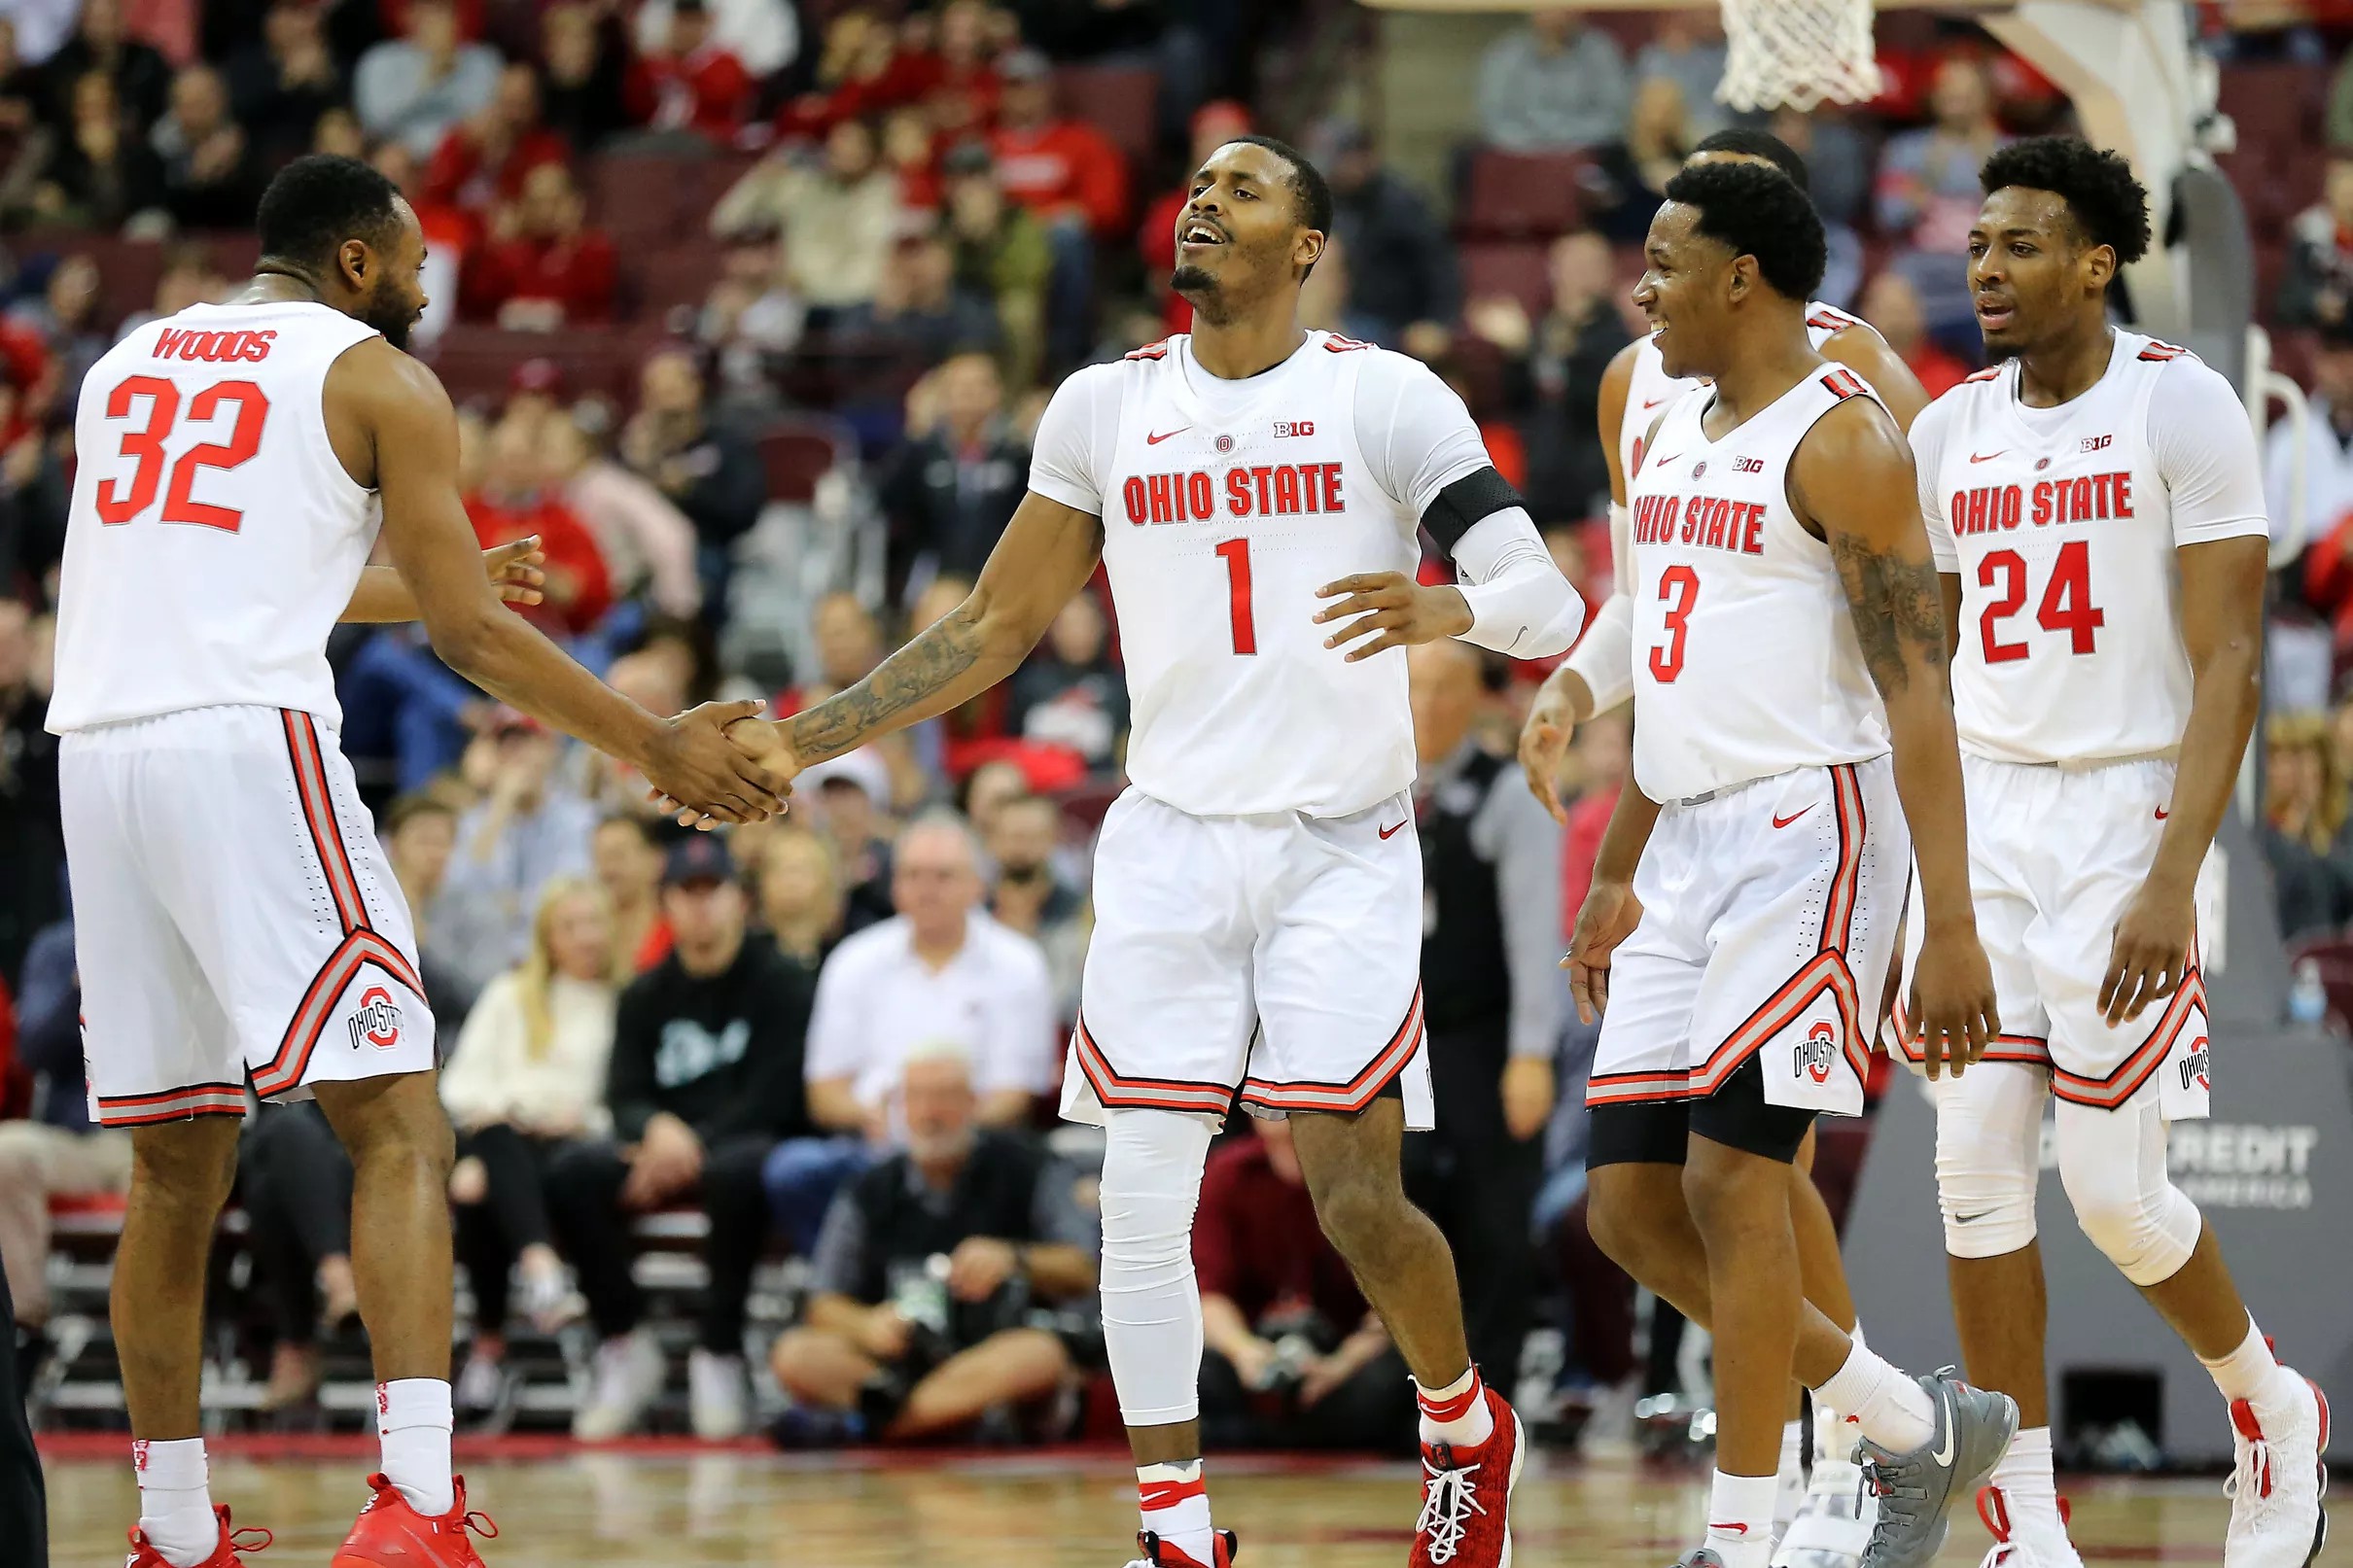 Ohio State men’s basketball stays at No. 15 in AP poll